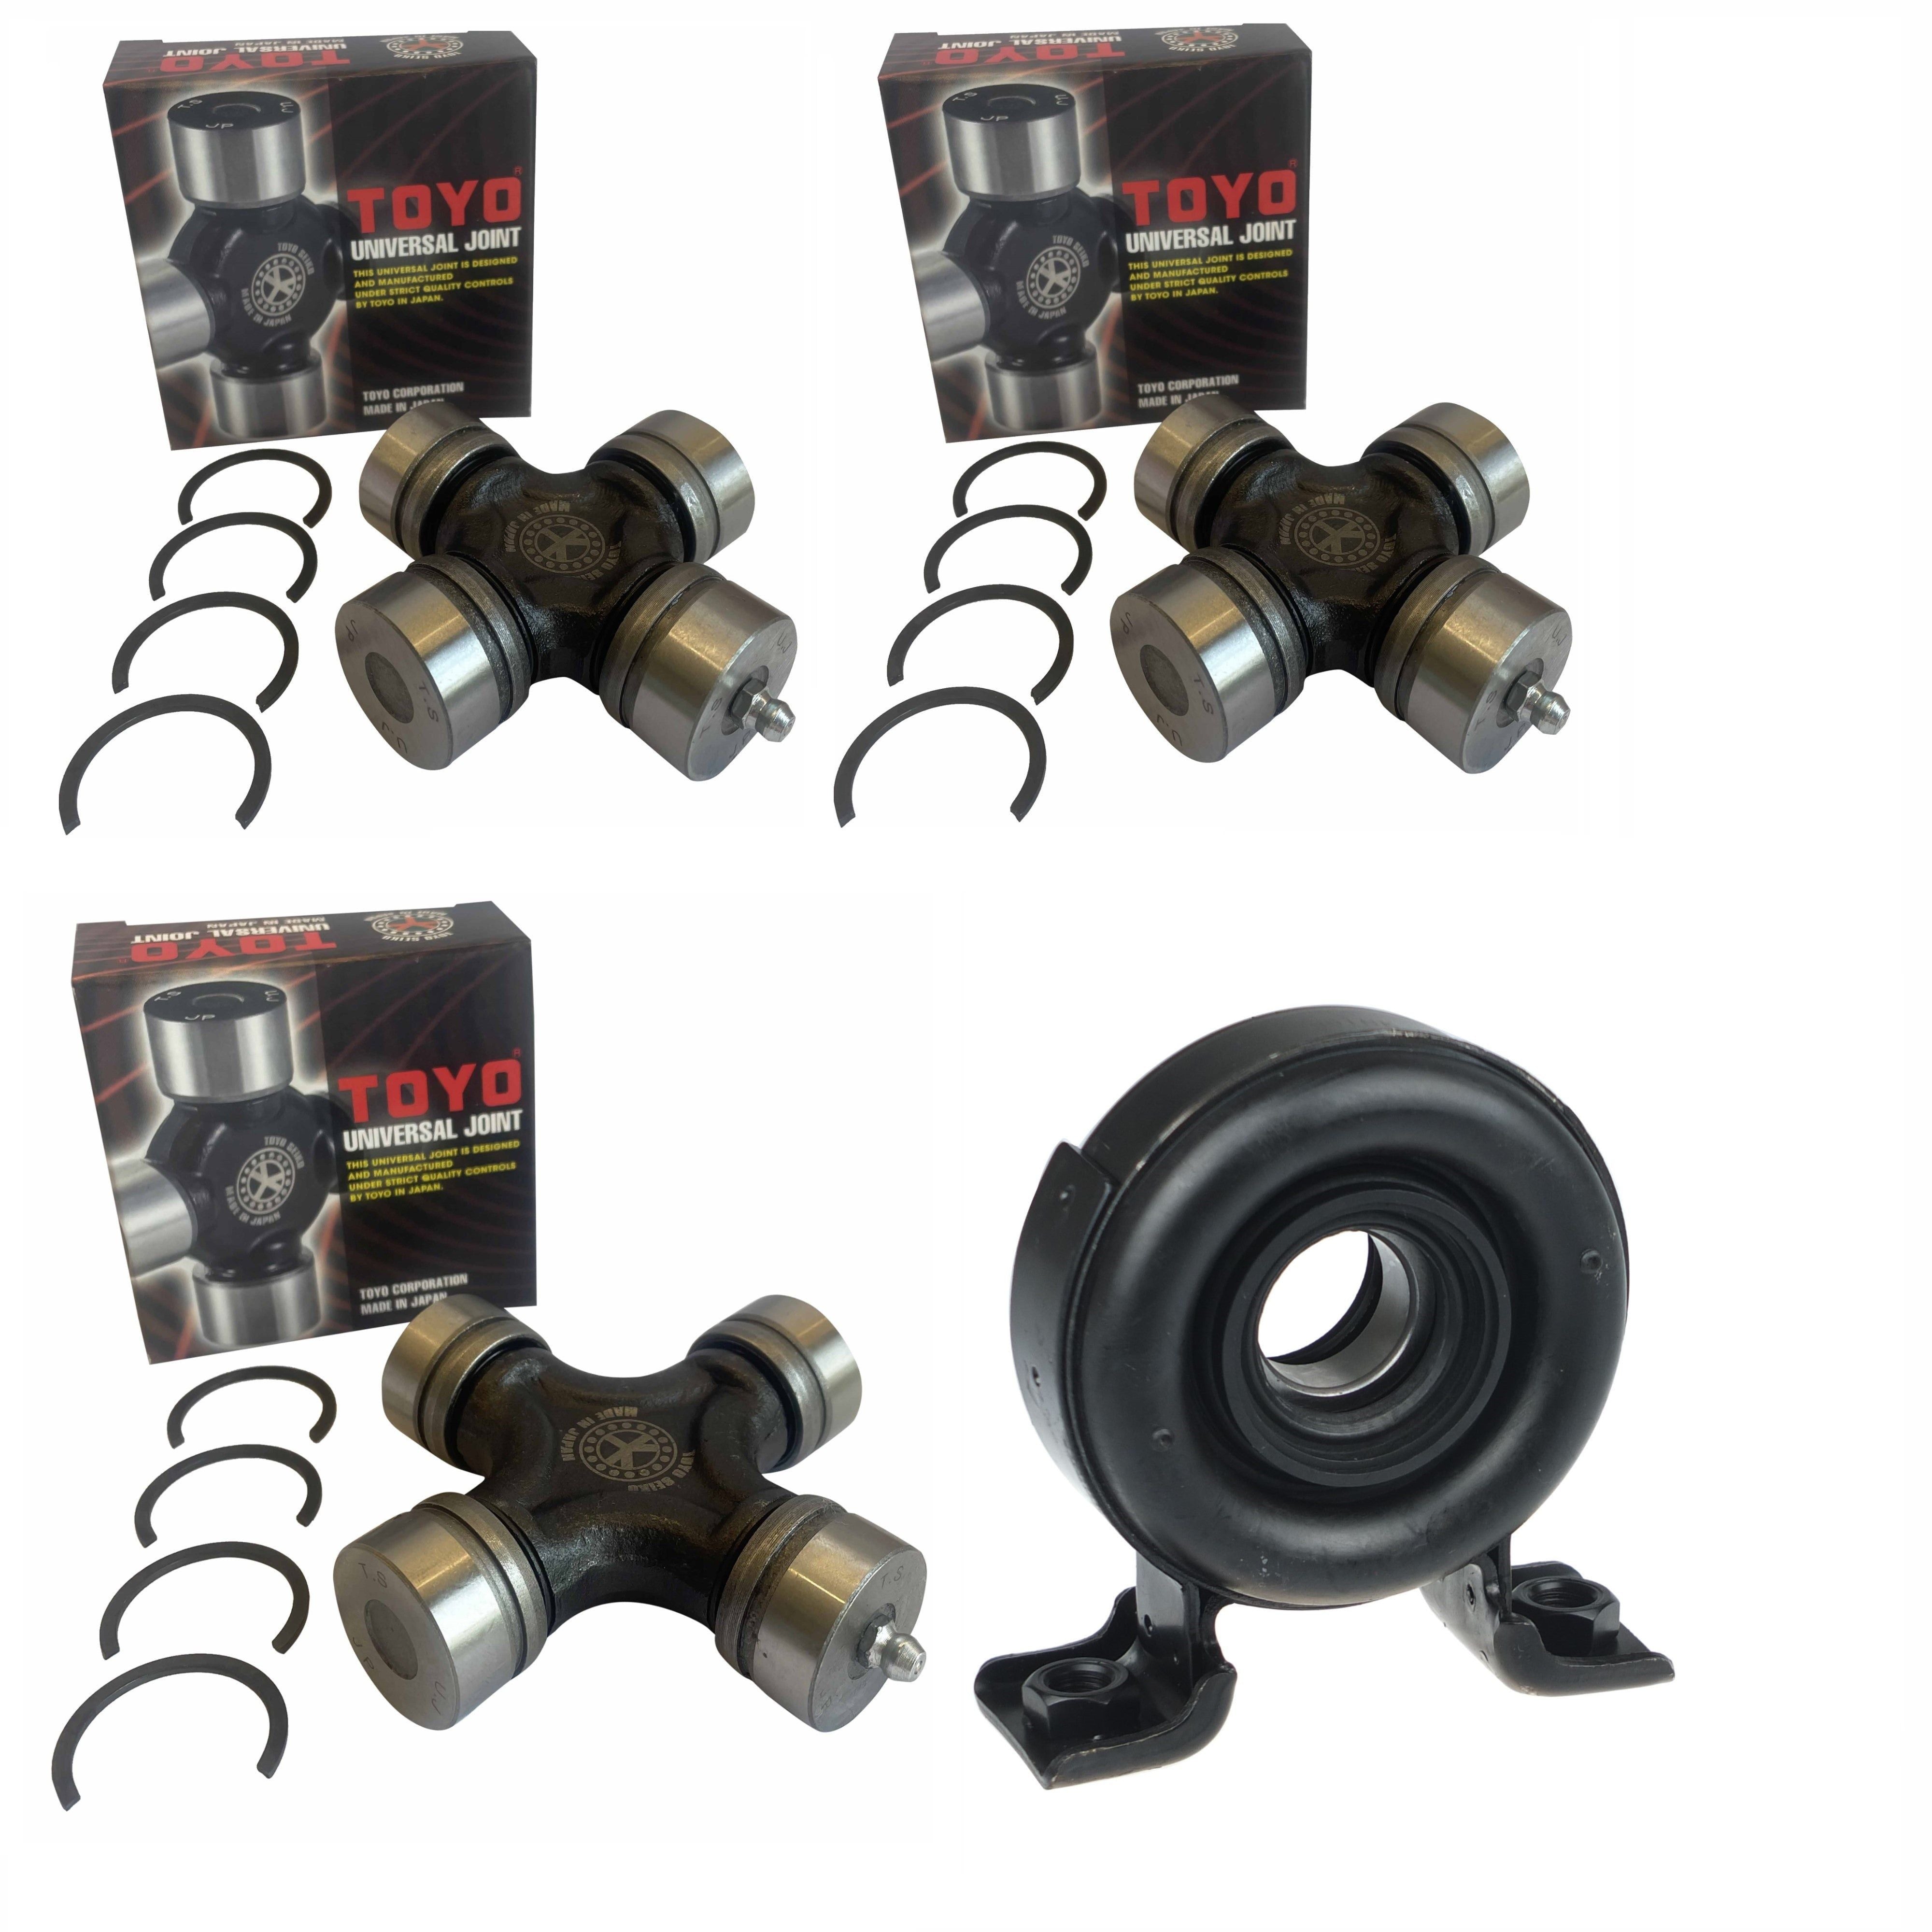 Centre Bearing + 3 Universal Joints for Holden Rodeo TF 2.8L 3.0L 3.2L 4WD